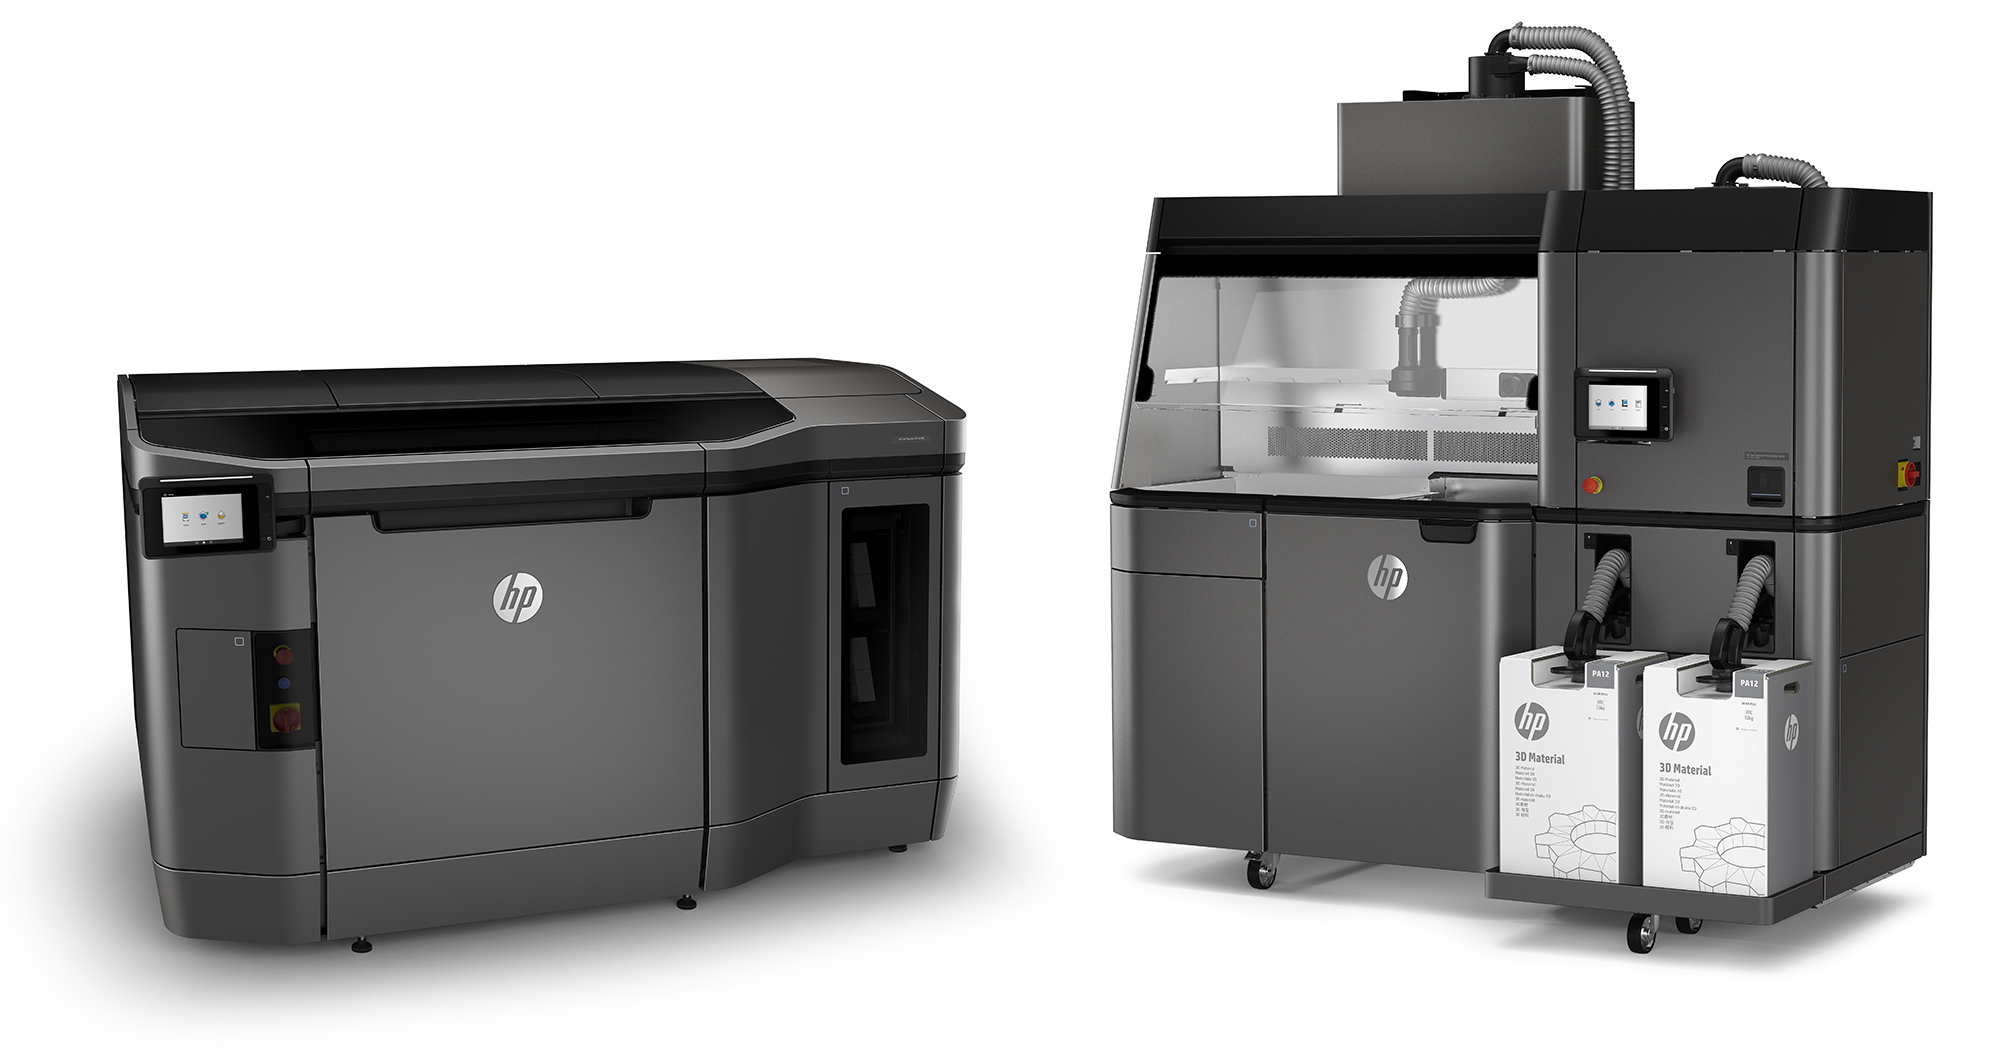  HP's new Jet Fusion 3D printers: the printer itself and the associated processing station 